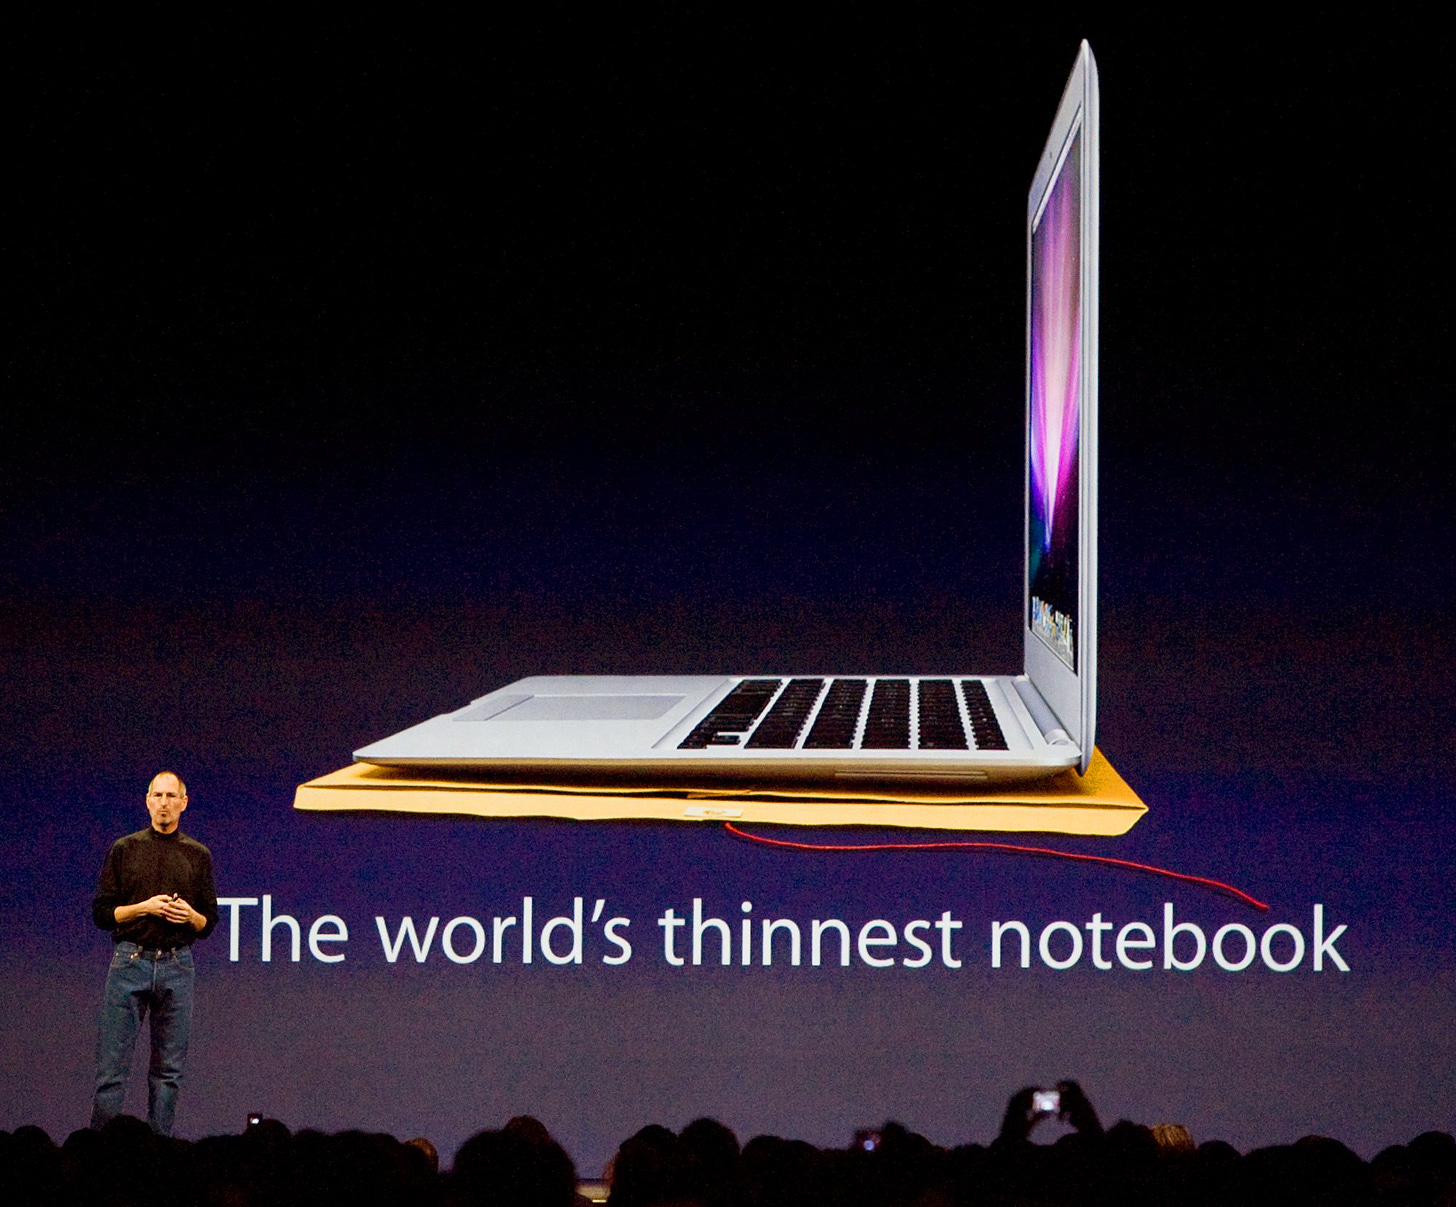 Apple CEO Steve Jobs announced the new Macbook Air, at the Macworld Conference and Expo in San Francisco, Tuesday, January 15, 2008. The laptop billed as the world's thinnest computer features a 13.3" widescreen, a keyboard that has an ambient light sens Apple CEO Steve Jobs announced the new Macbook Air, at the Macworld Conference and Expo in San Francisco, Tuesday, January 15, 2008. The laptop billed as the world's thinnest computer features a 13.3" widescreen, a keyboard that has an ambient light sensor and a multi-touch trackpad. (John Green/Bay Area News Group) (Photo by MediaNews Group/Bay Area News via Getty Images)